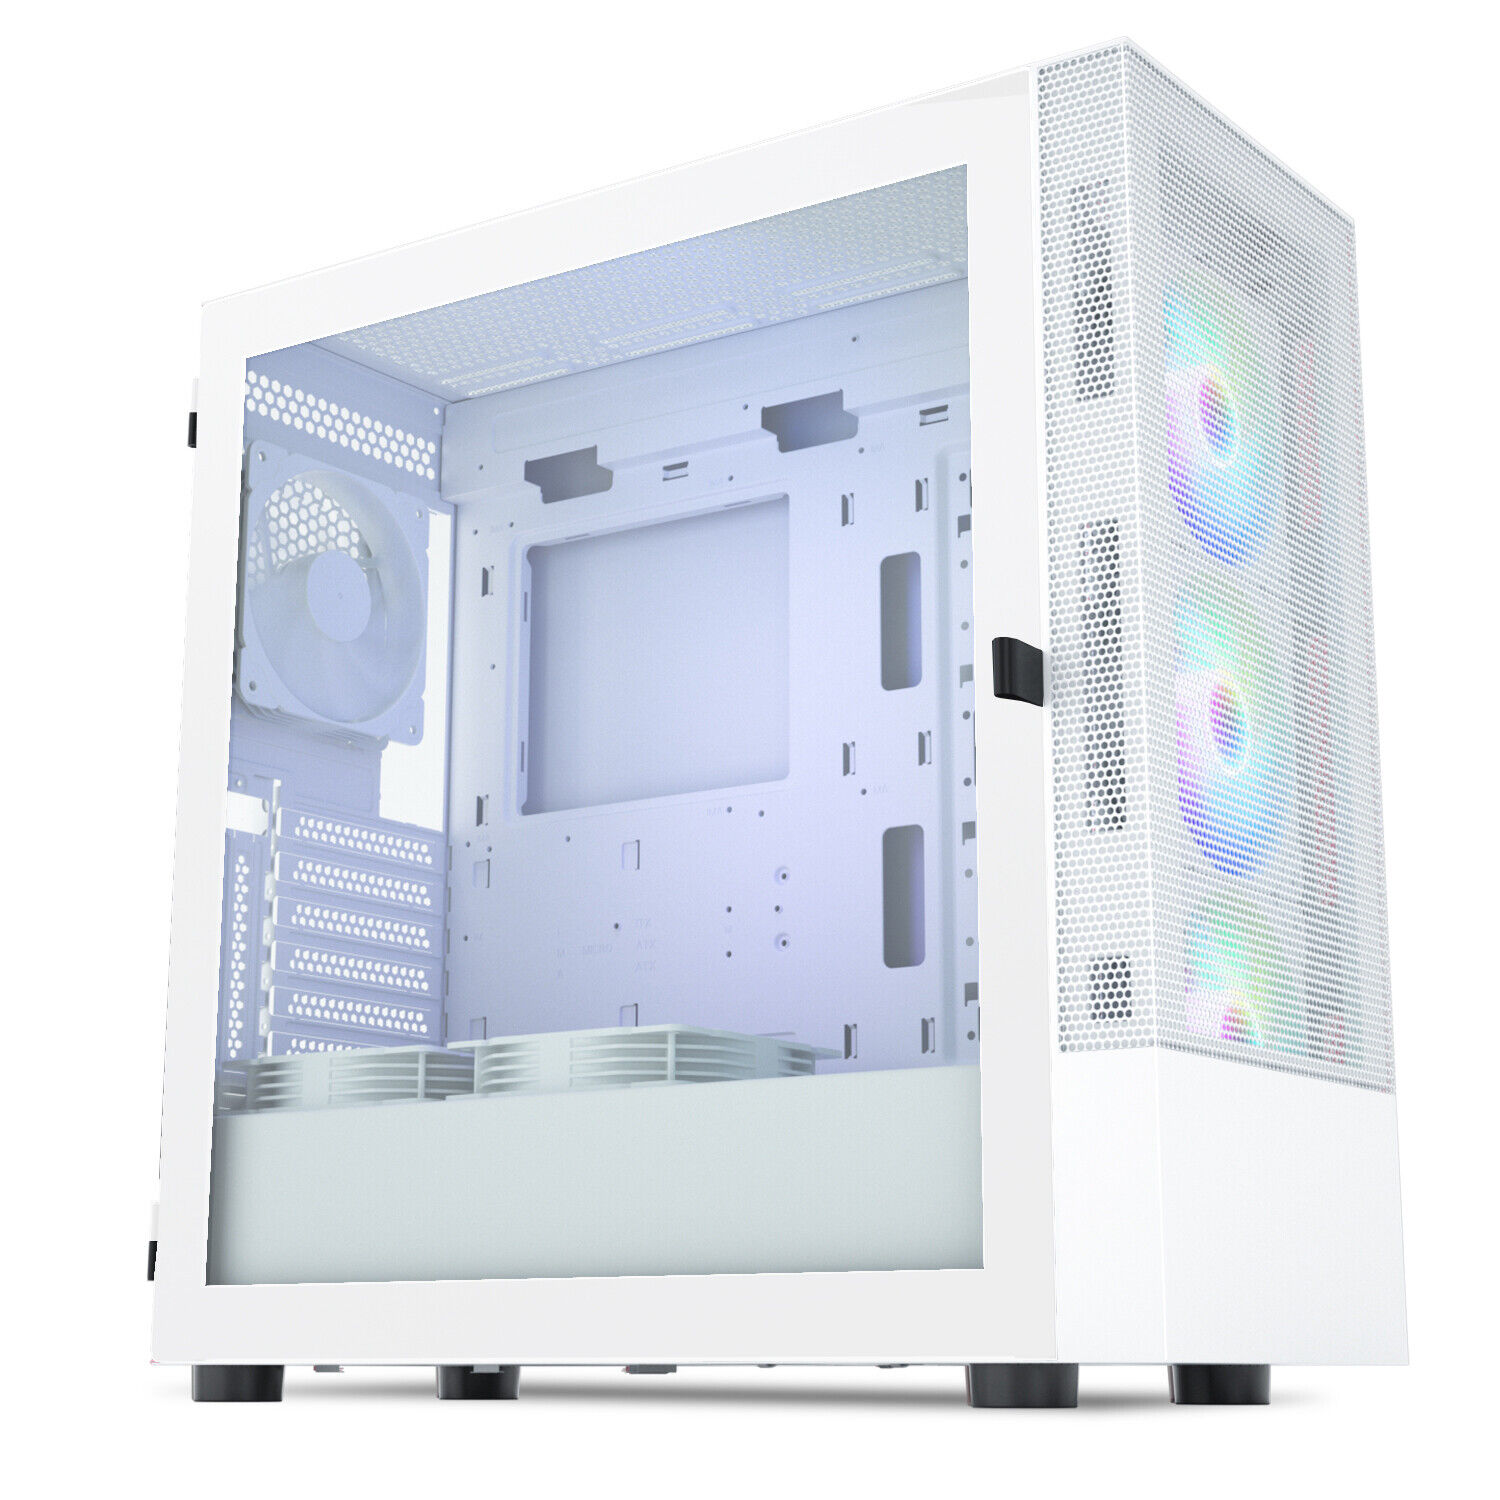 Vetroo AL600 MESH White Mid-Tower Gaming Computer Case ATX w/ 6 PCS 120mm Fans